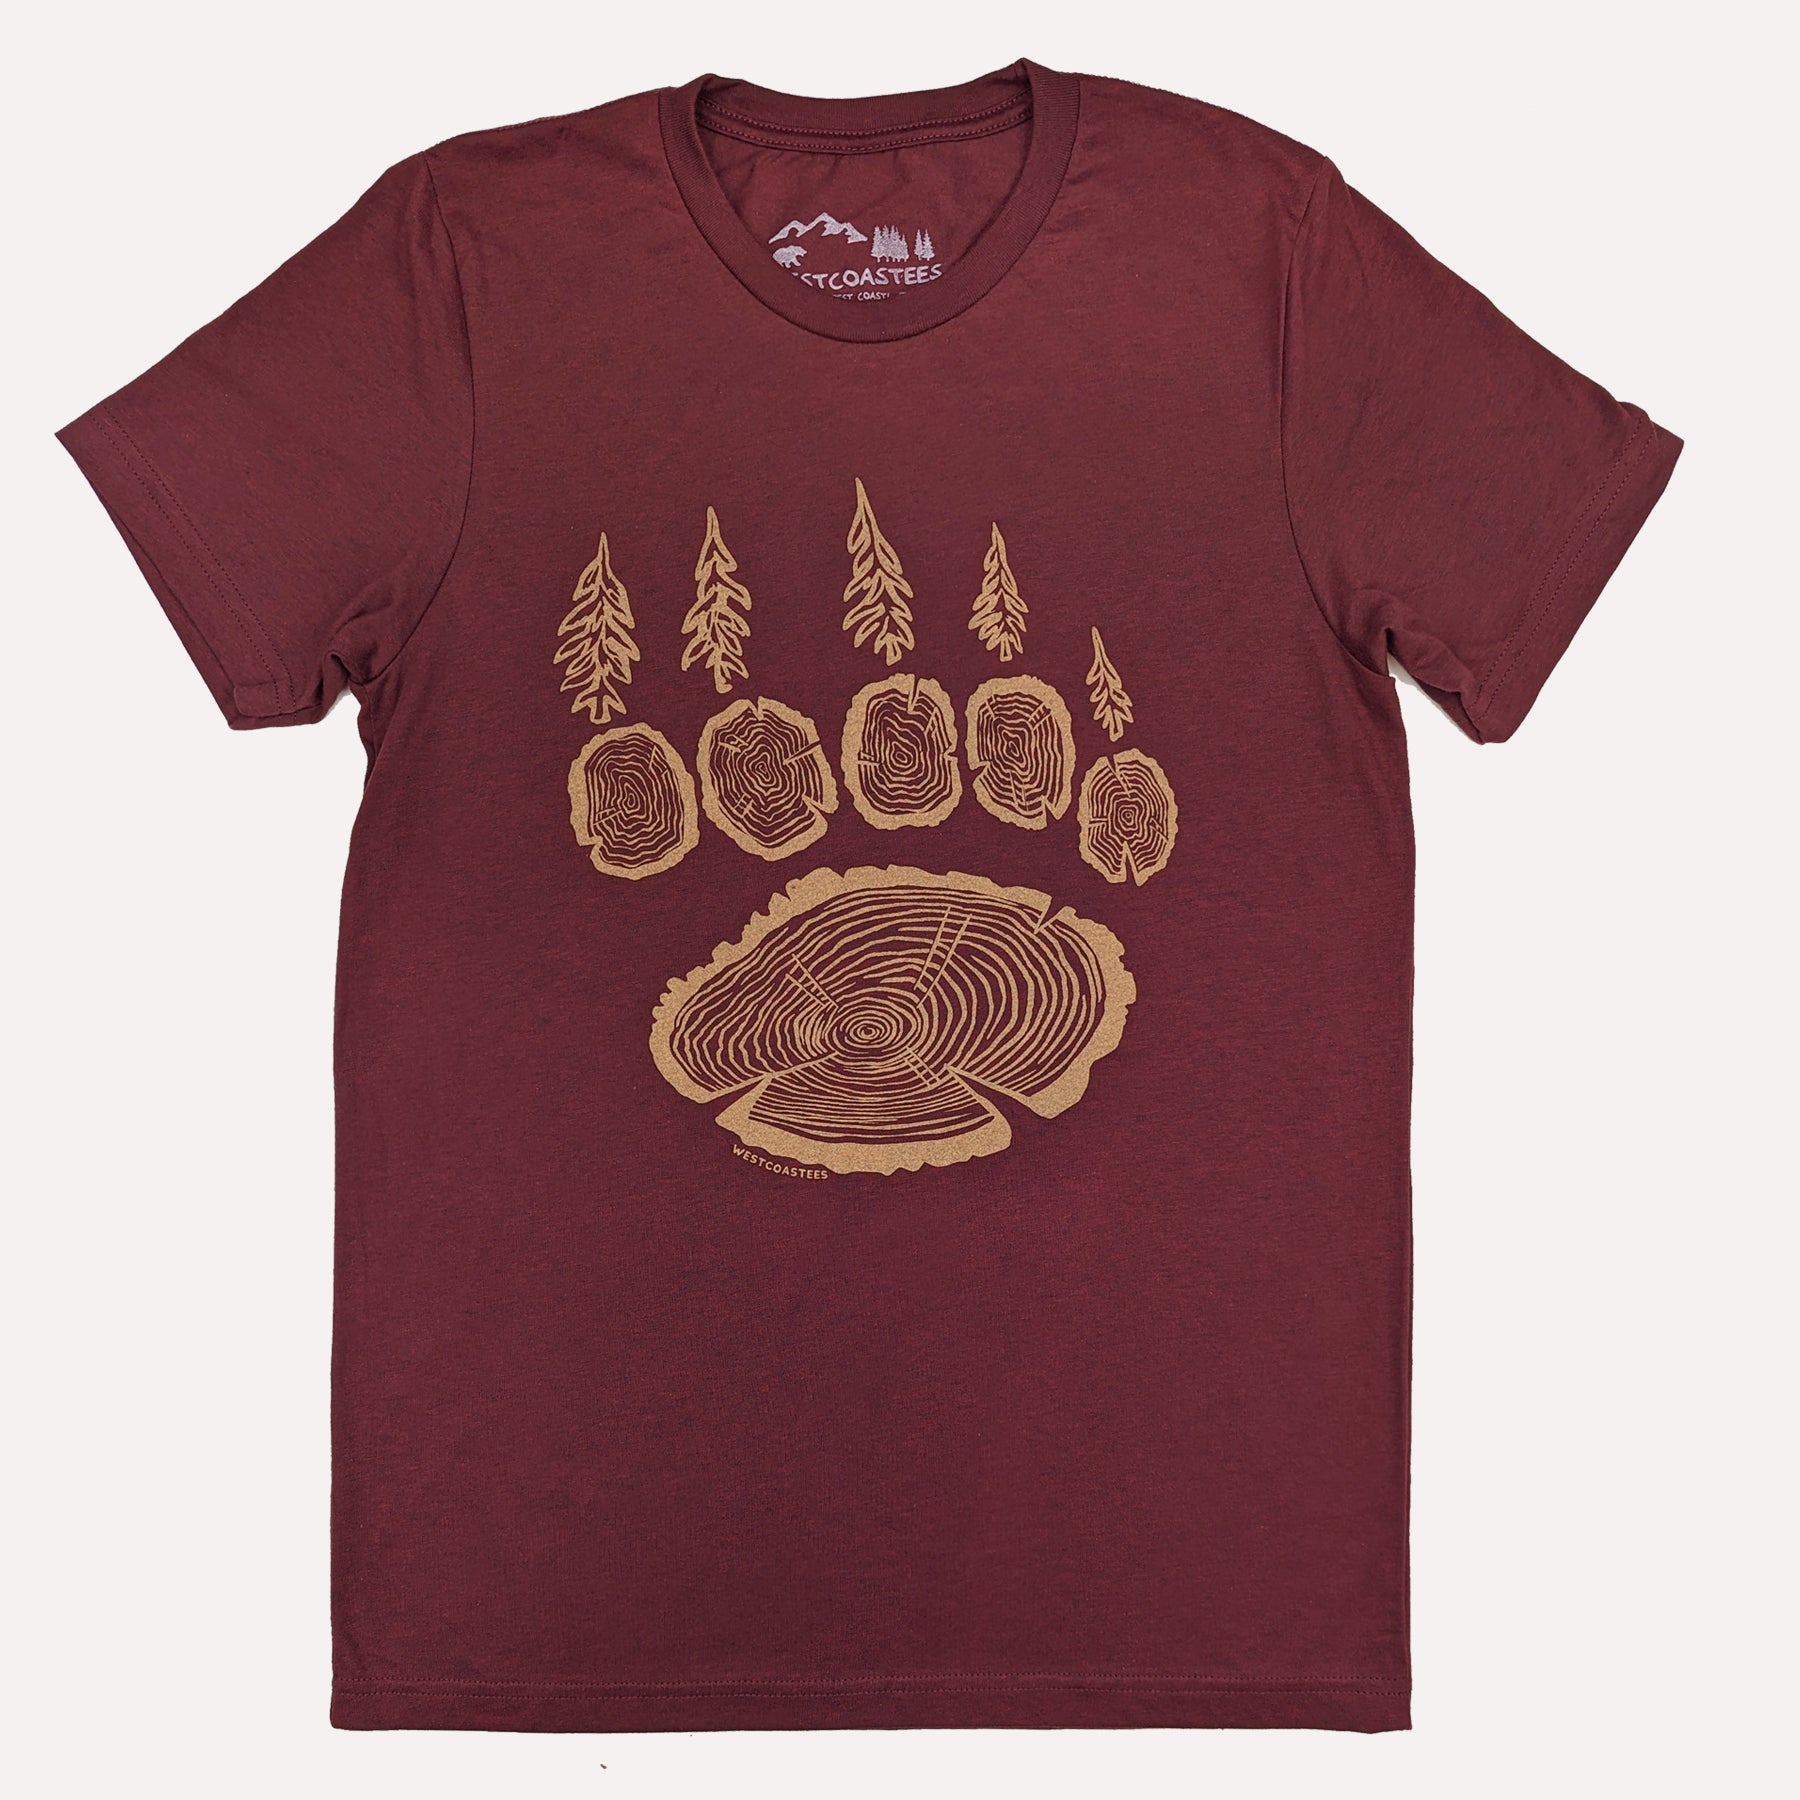 Westcoastees T-Shirt Forest Paw - Westcoastees T-Shirt Forest Paw -  - House of Himwitsa Native Art Gallery and Gifts